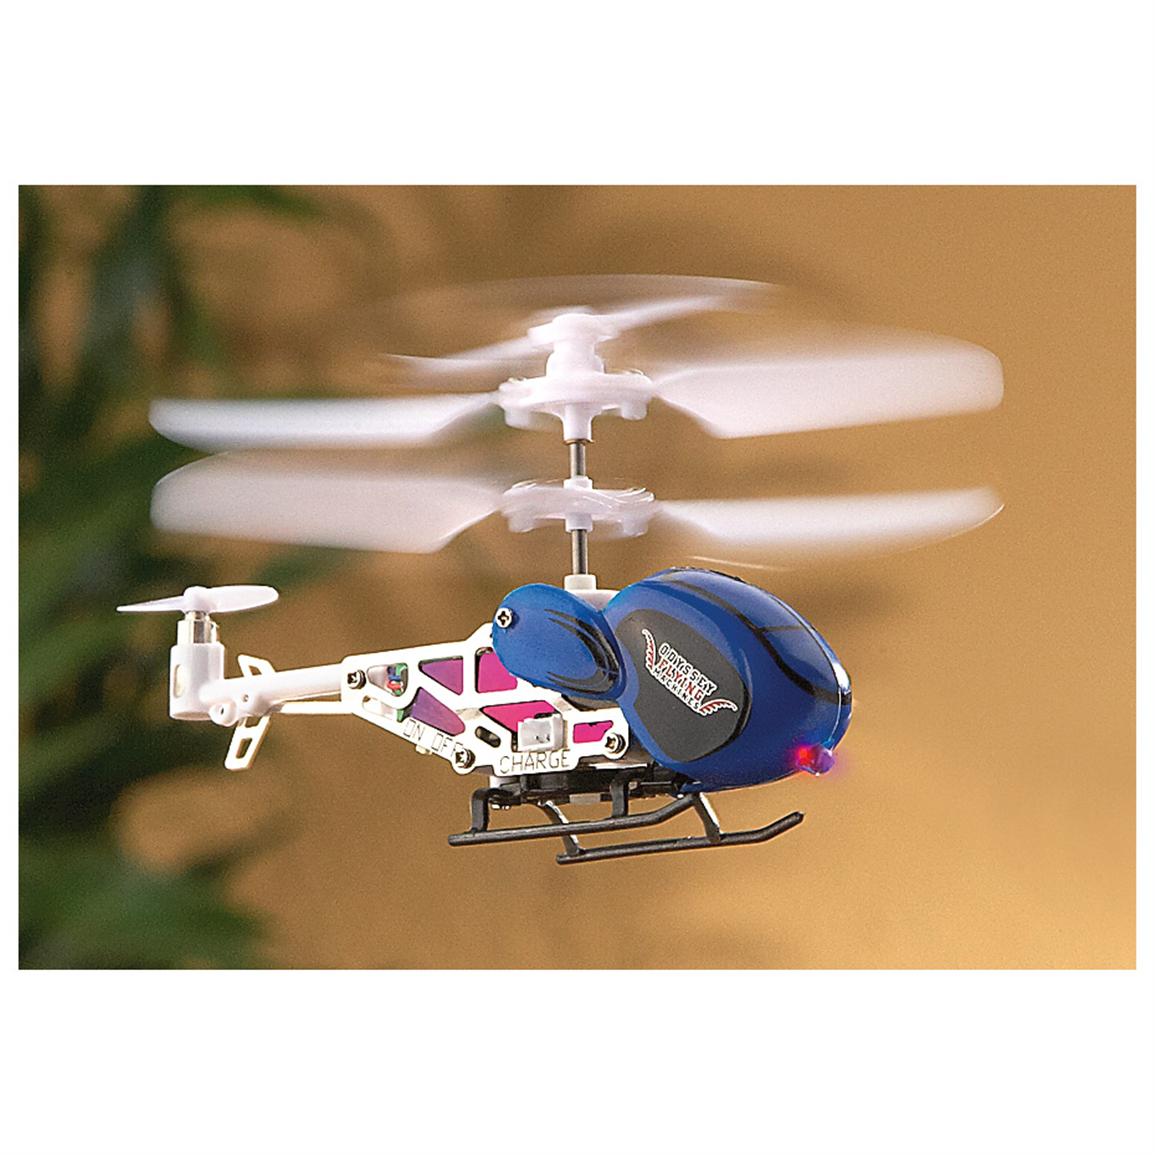 World's Smallest Radio-controlled Helicopter